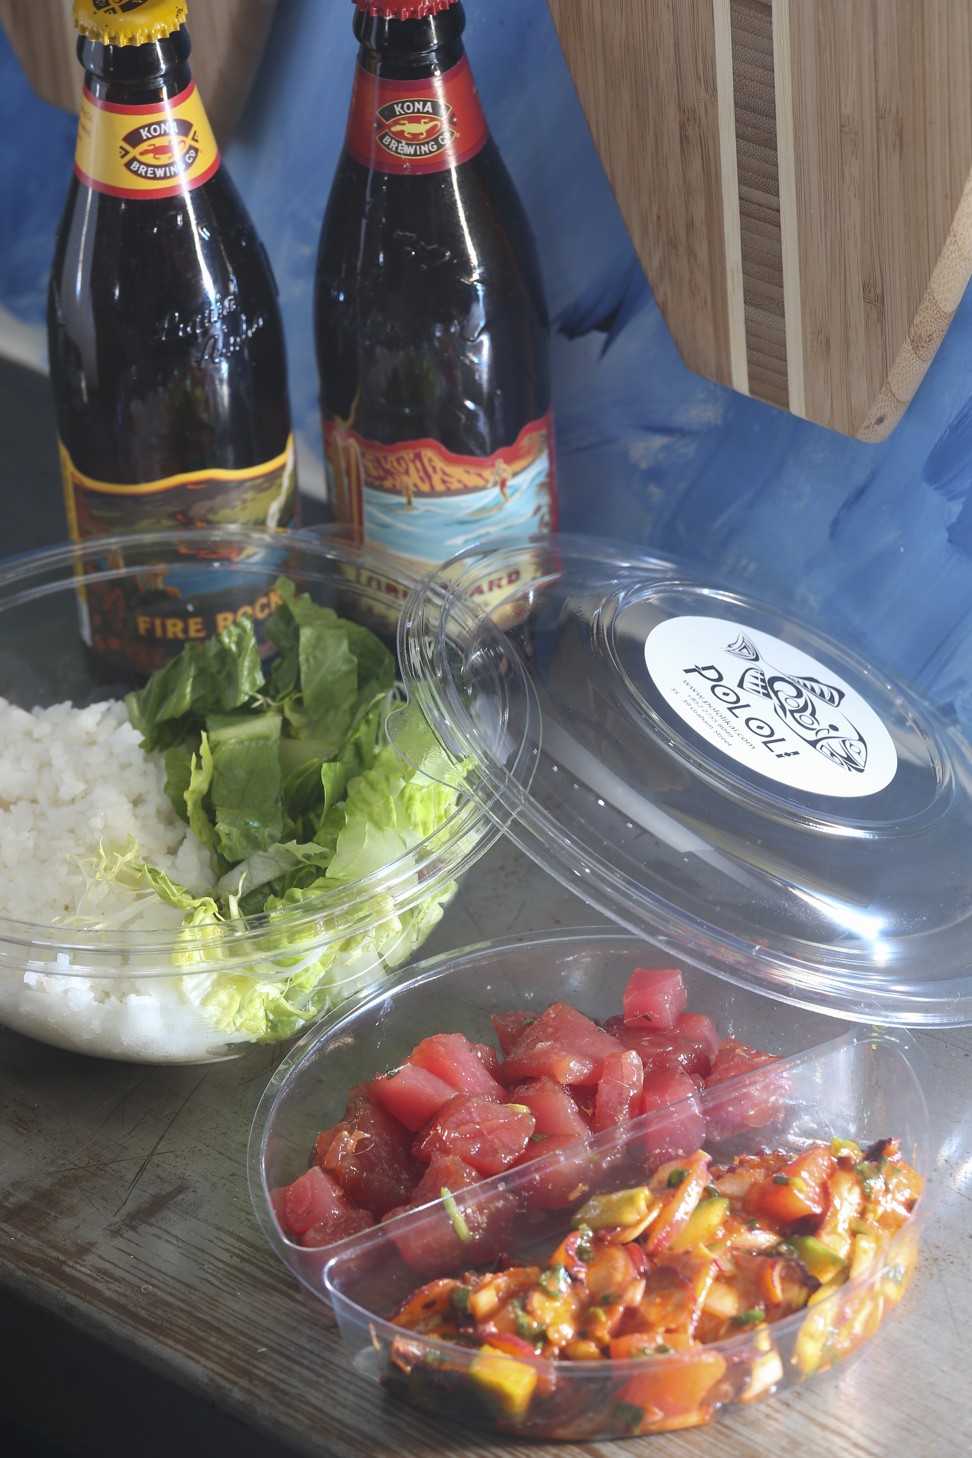 A tuna and octopus poke bowl from Pololi. Photo: K.Y. Cheng